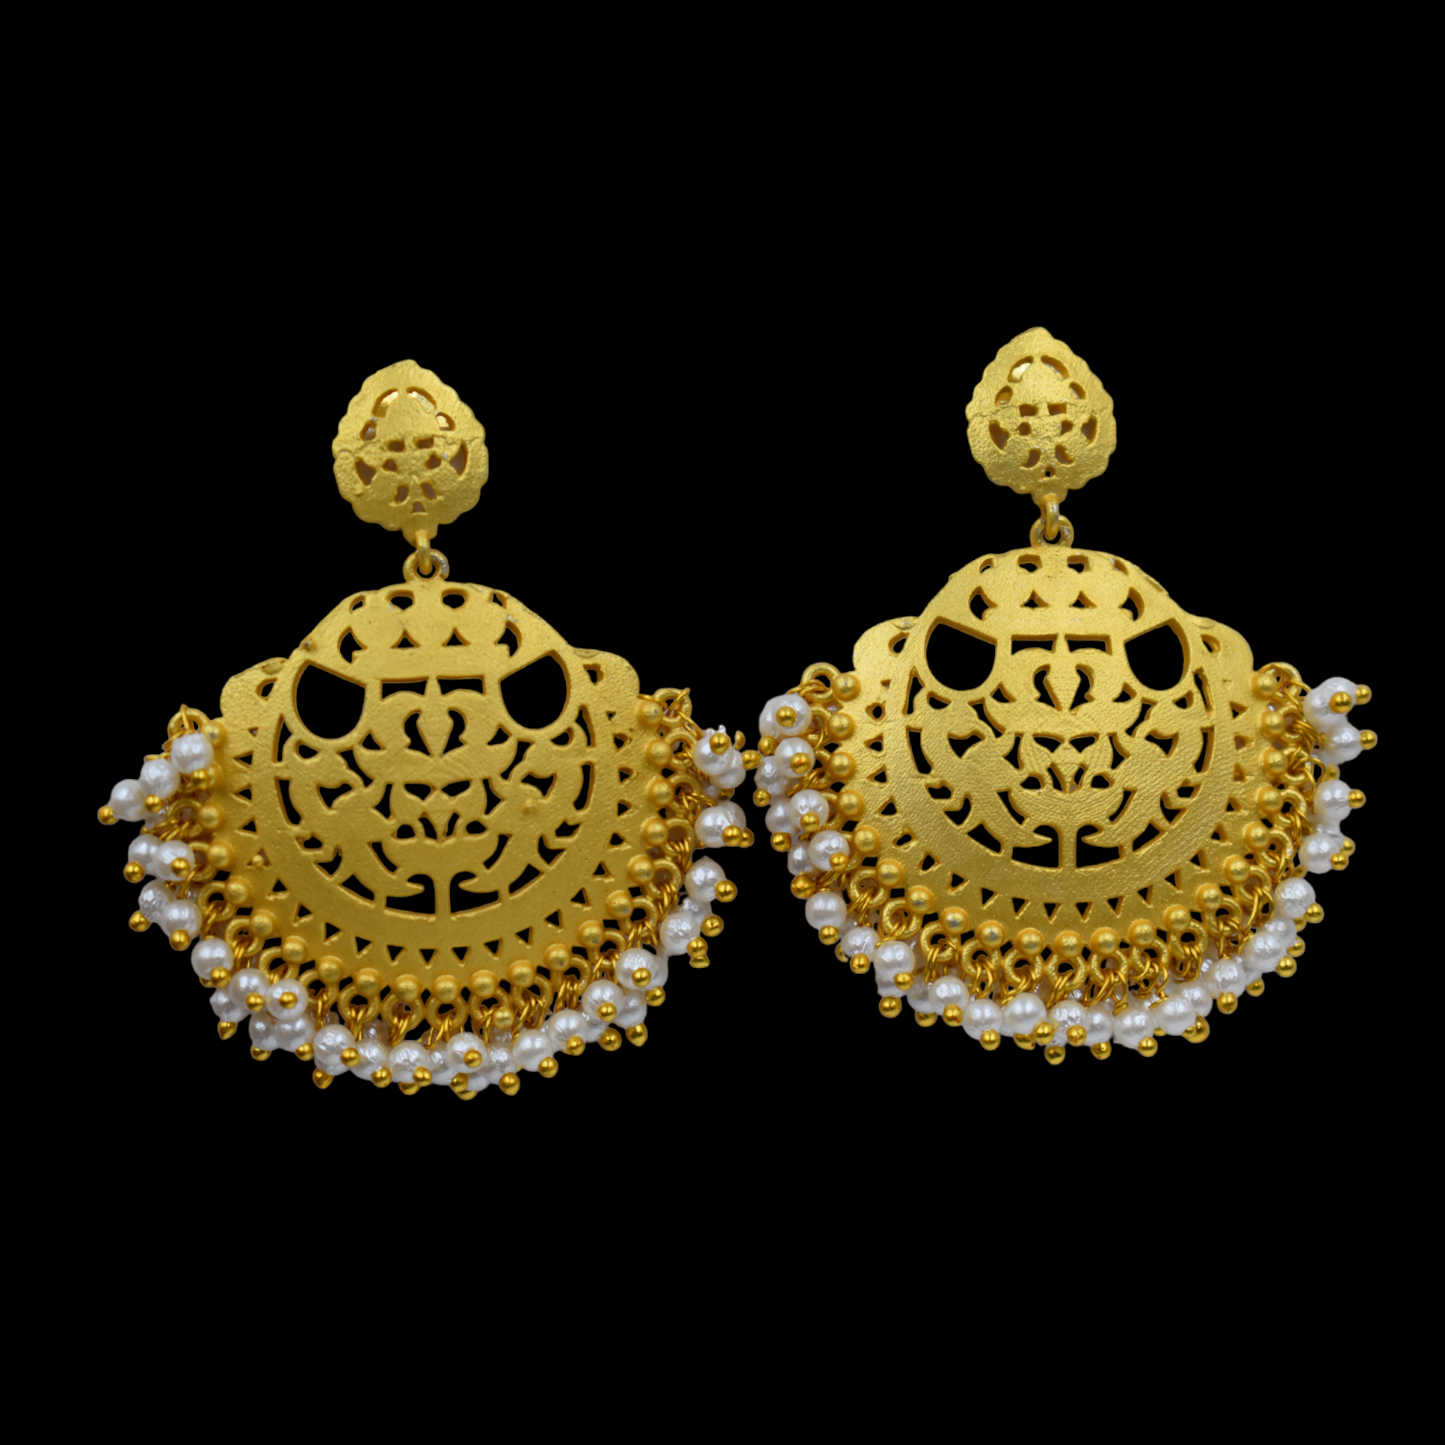 Unique pair of goldplated brass earing